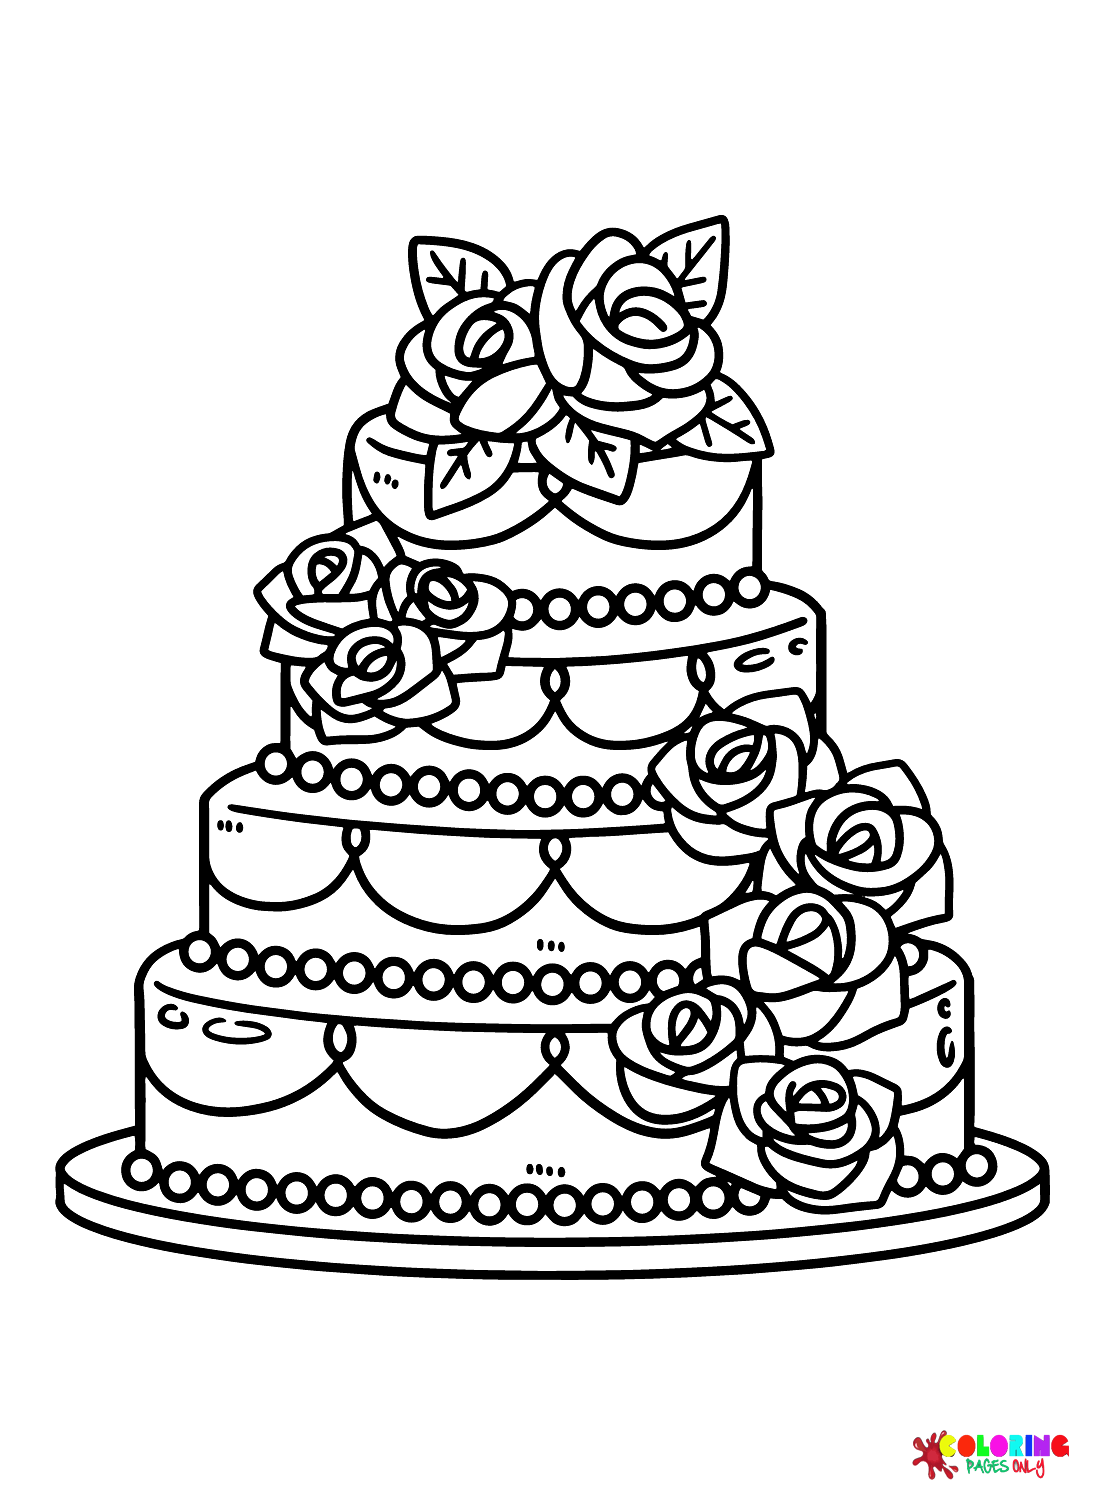 Wedding Cake with Flowers Coloring Page